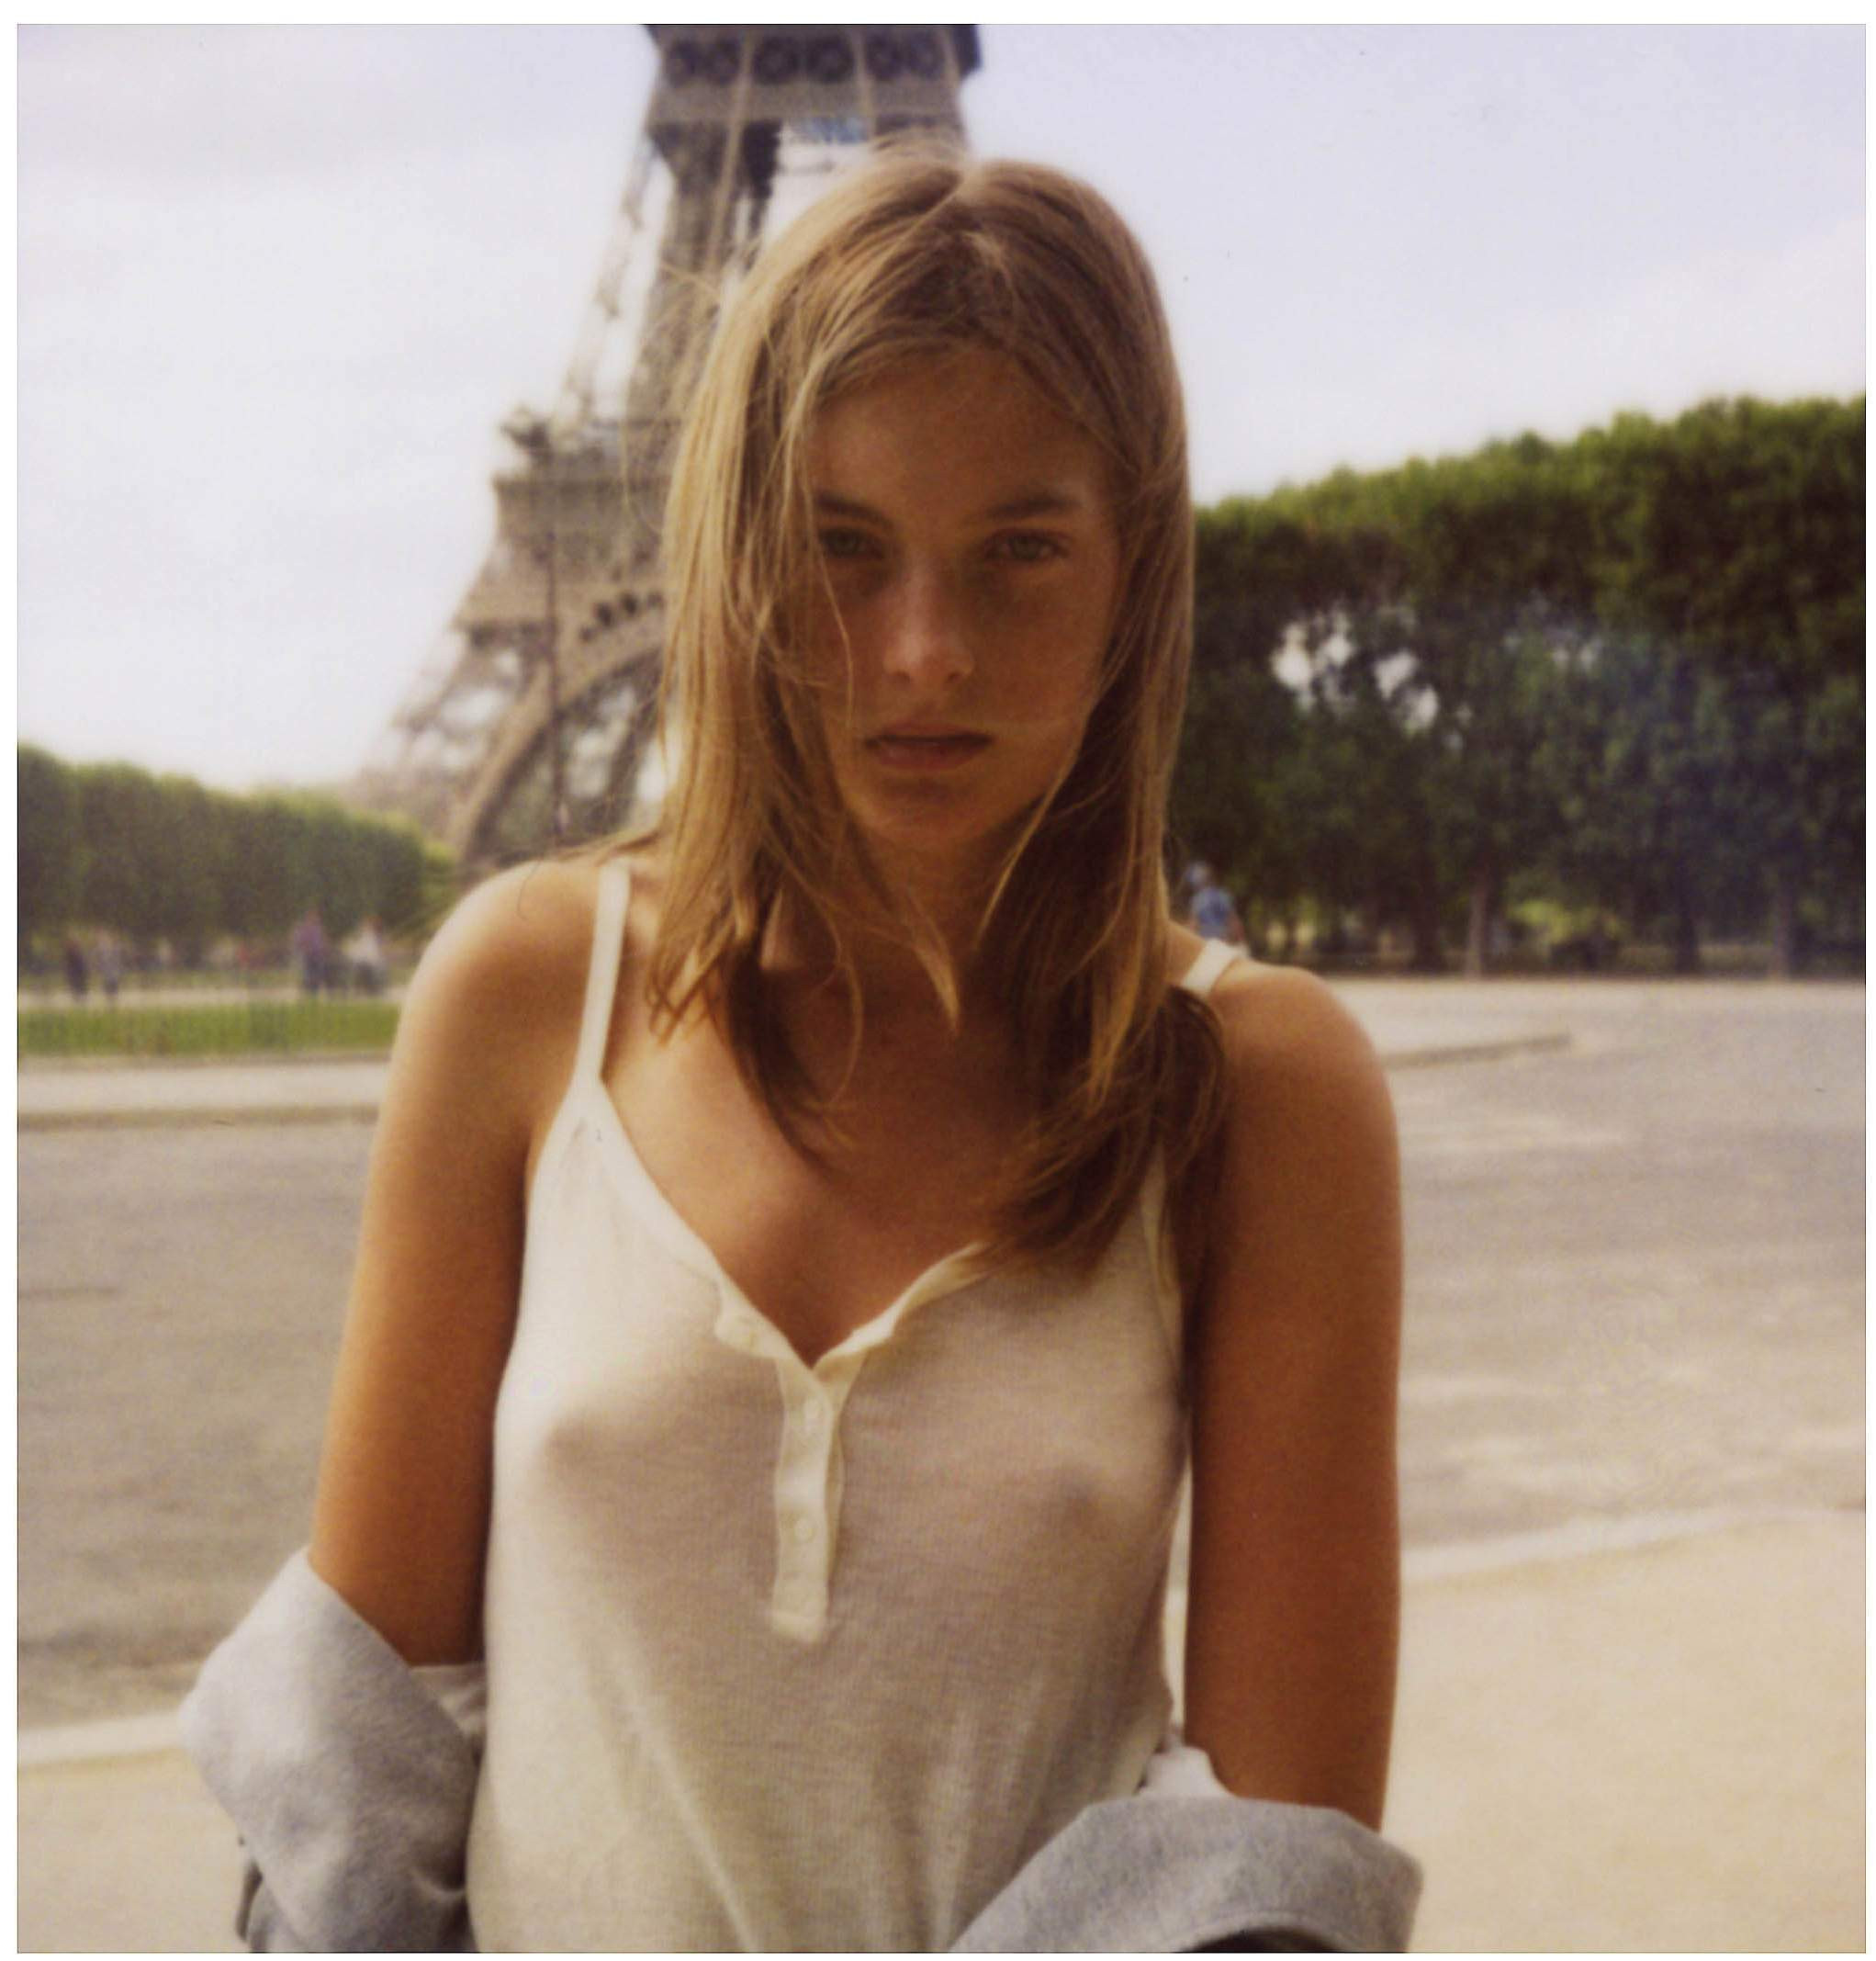 Photo of model Ophelie Rupp - ID 283070 